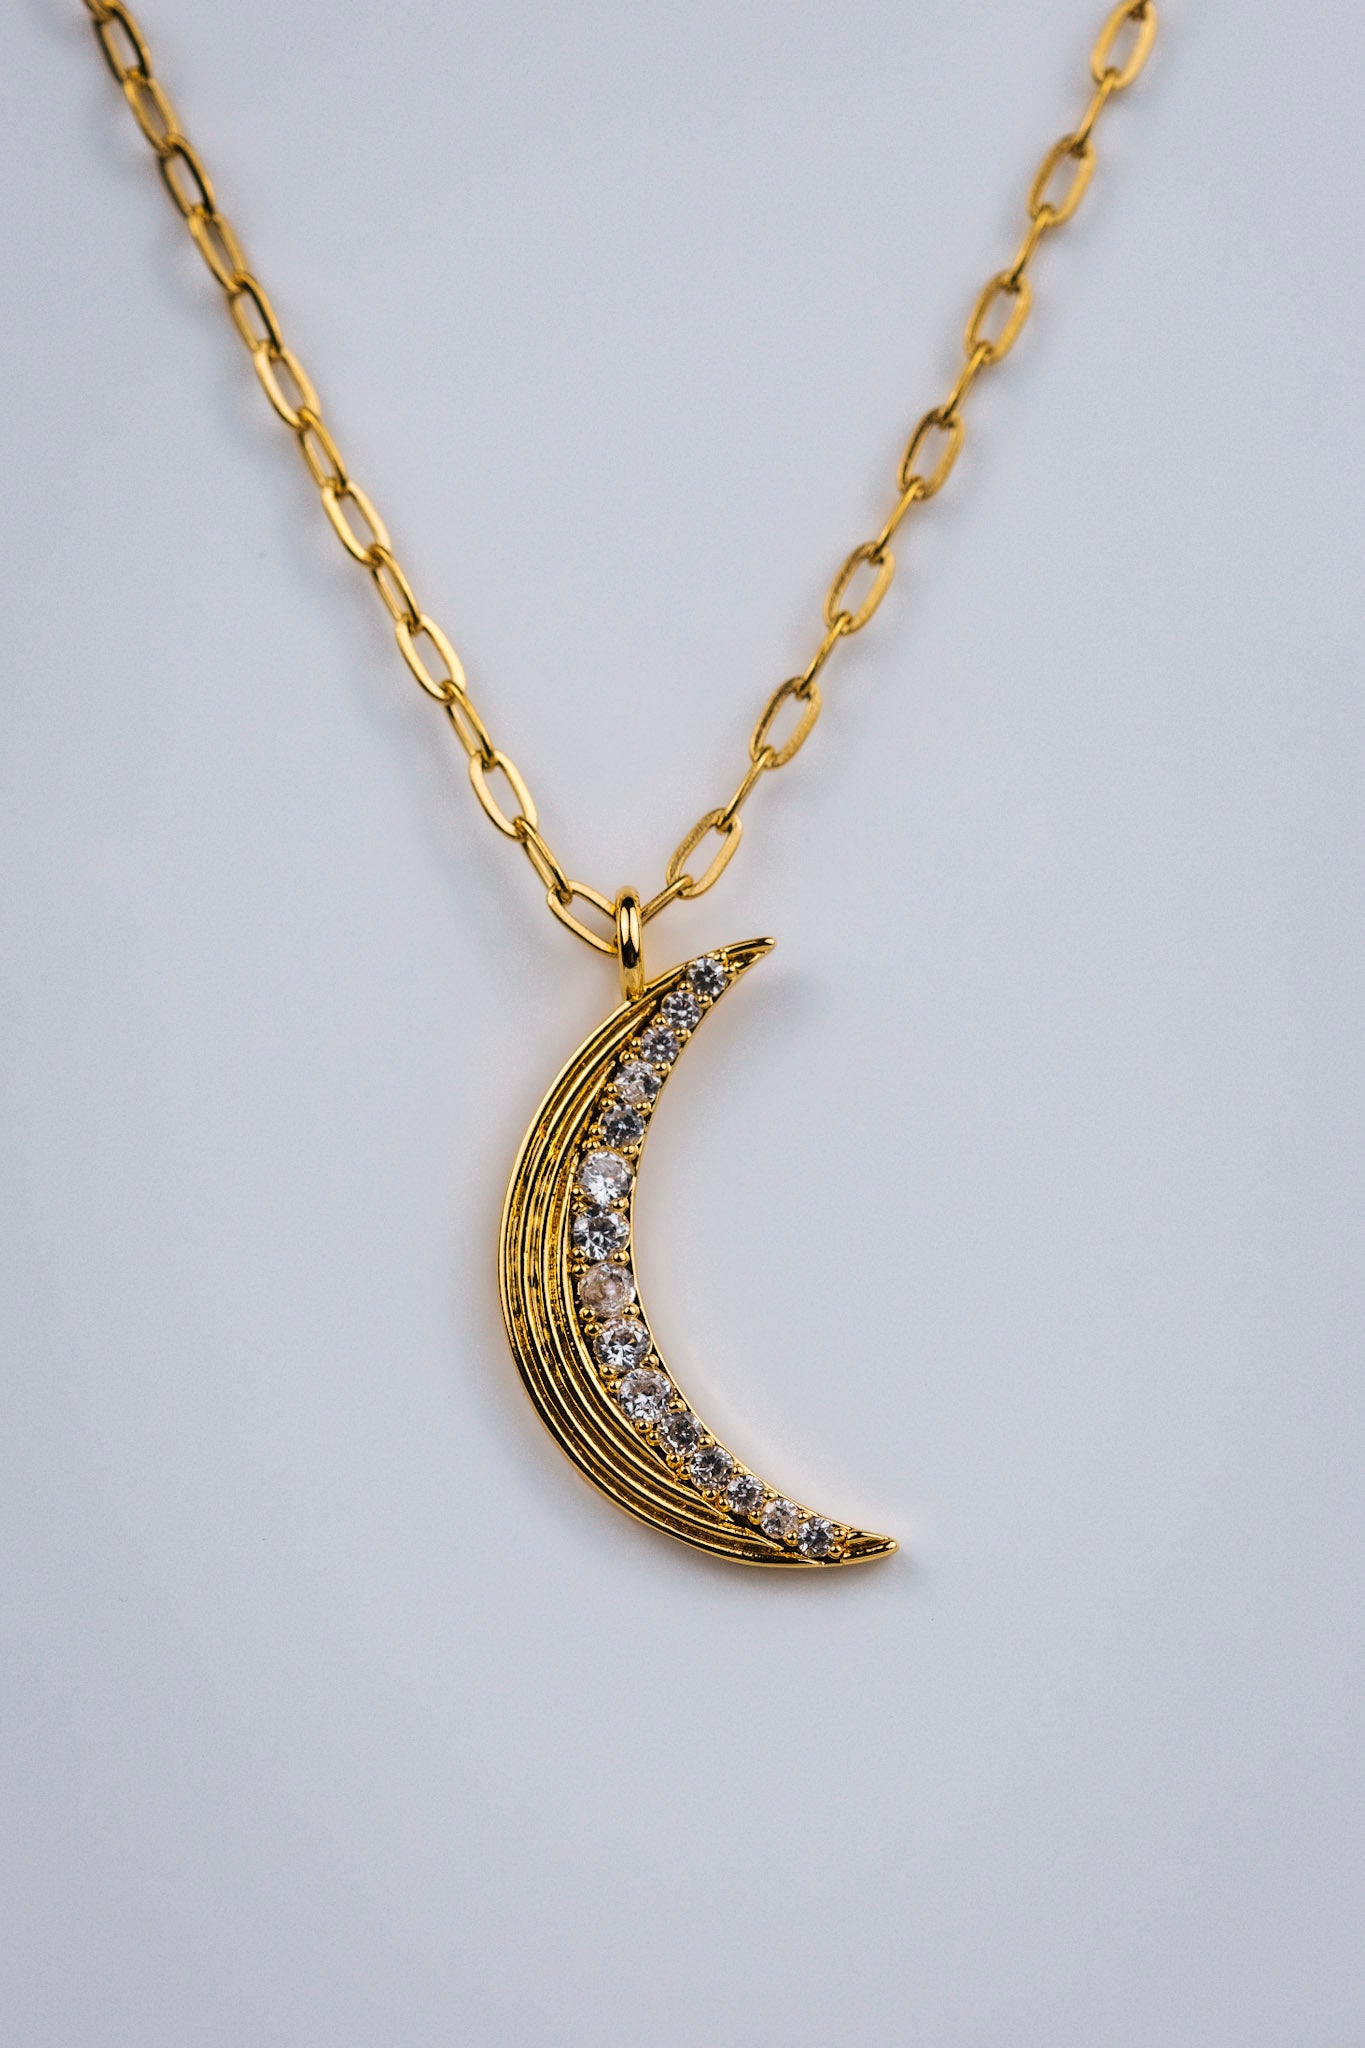 Crescent Moon 316L Stainless Steel Necklace Pendant